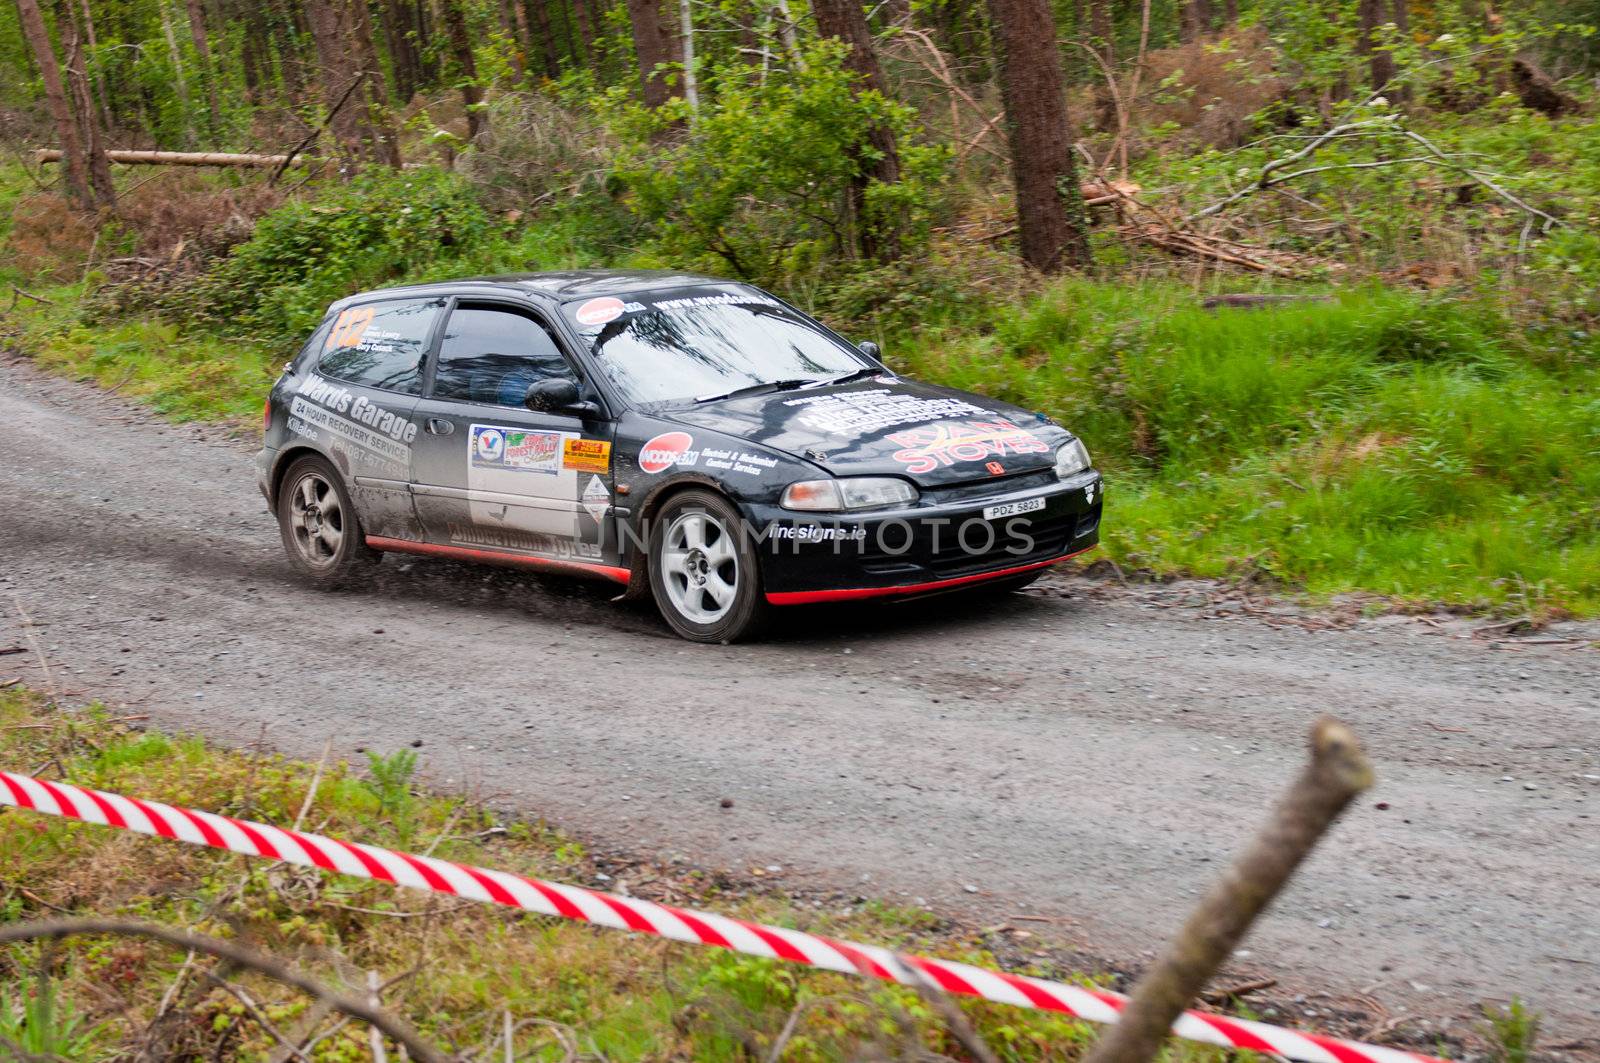 MALLOW, IRELAND - MAY 19: J. Lowery driving Honda Civic at the Jim Walsh Cork Forest Rally on May 19, 2012 in Mallow, Ireland. 4th round of the Valvoline National Forest Rally Championship.  